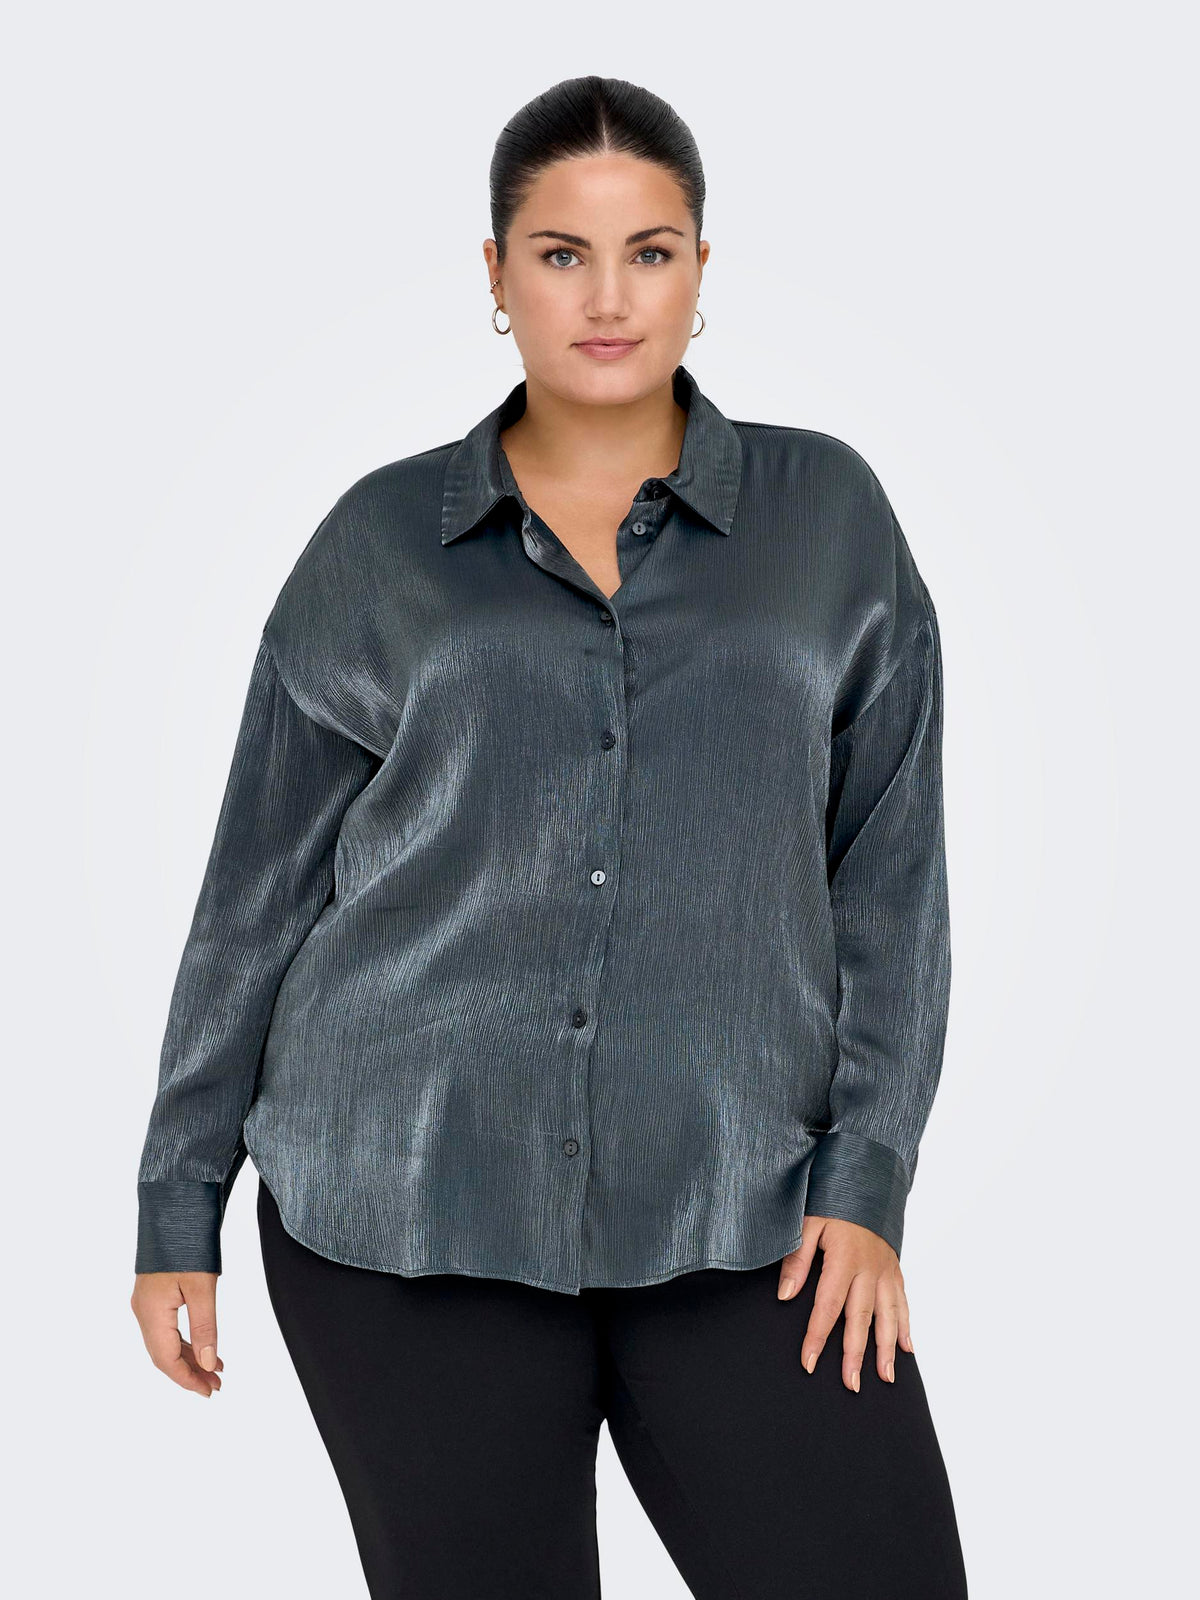 Only Carmakoma Tops, Plus Size Clothing